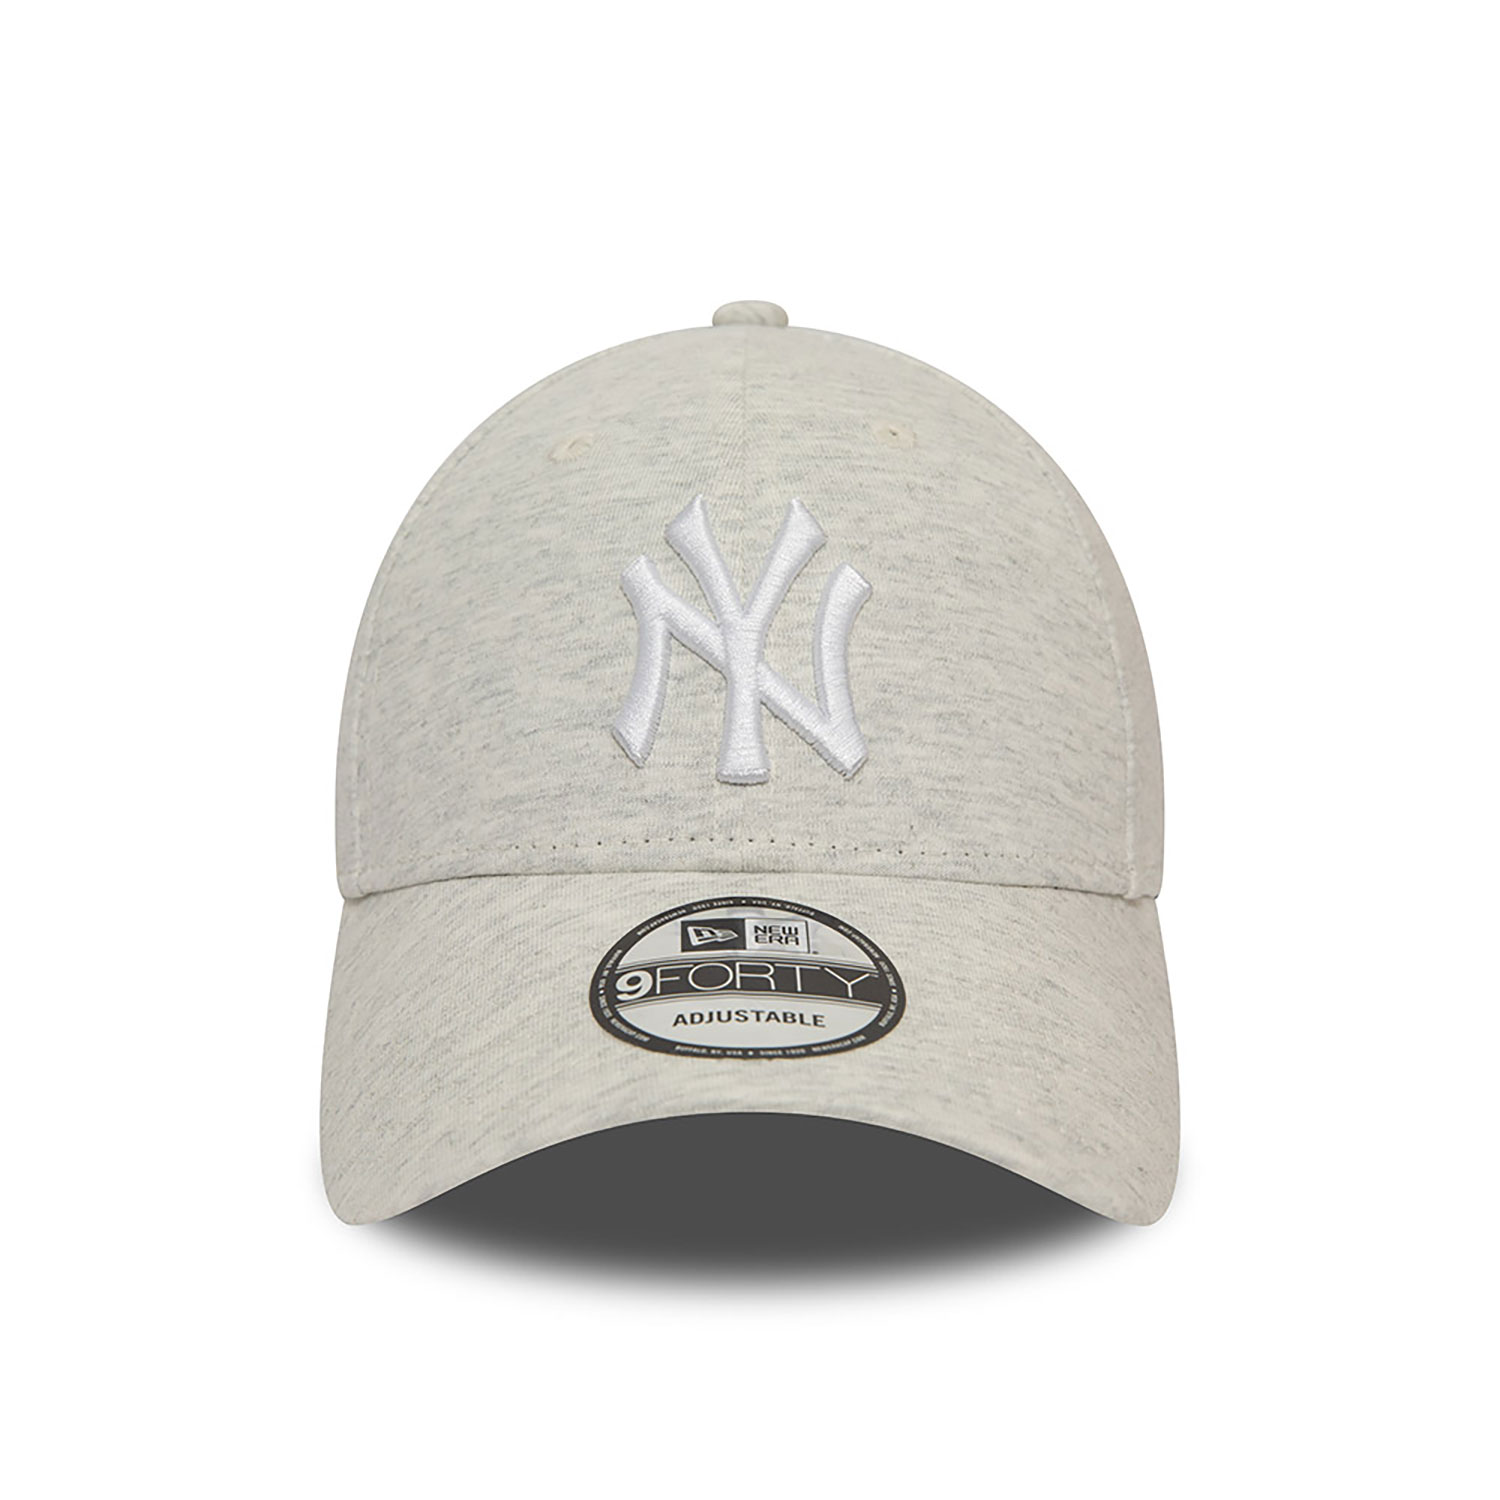 New York Yankees Jersey Essential Stone 9FORTY Adjustable Cap